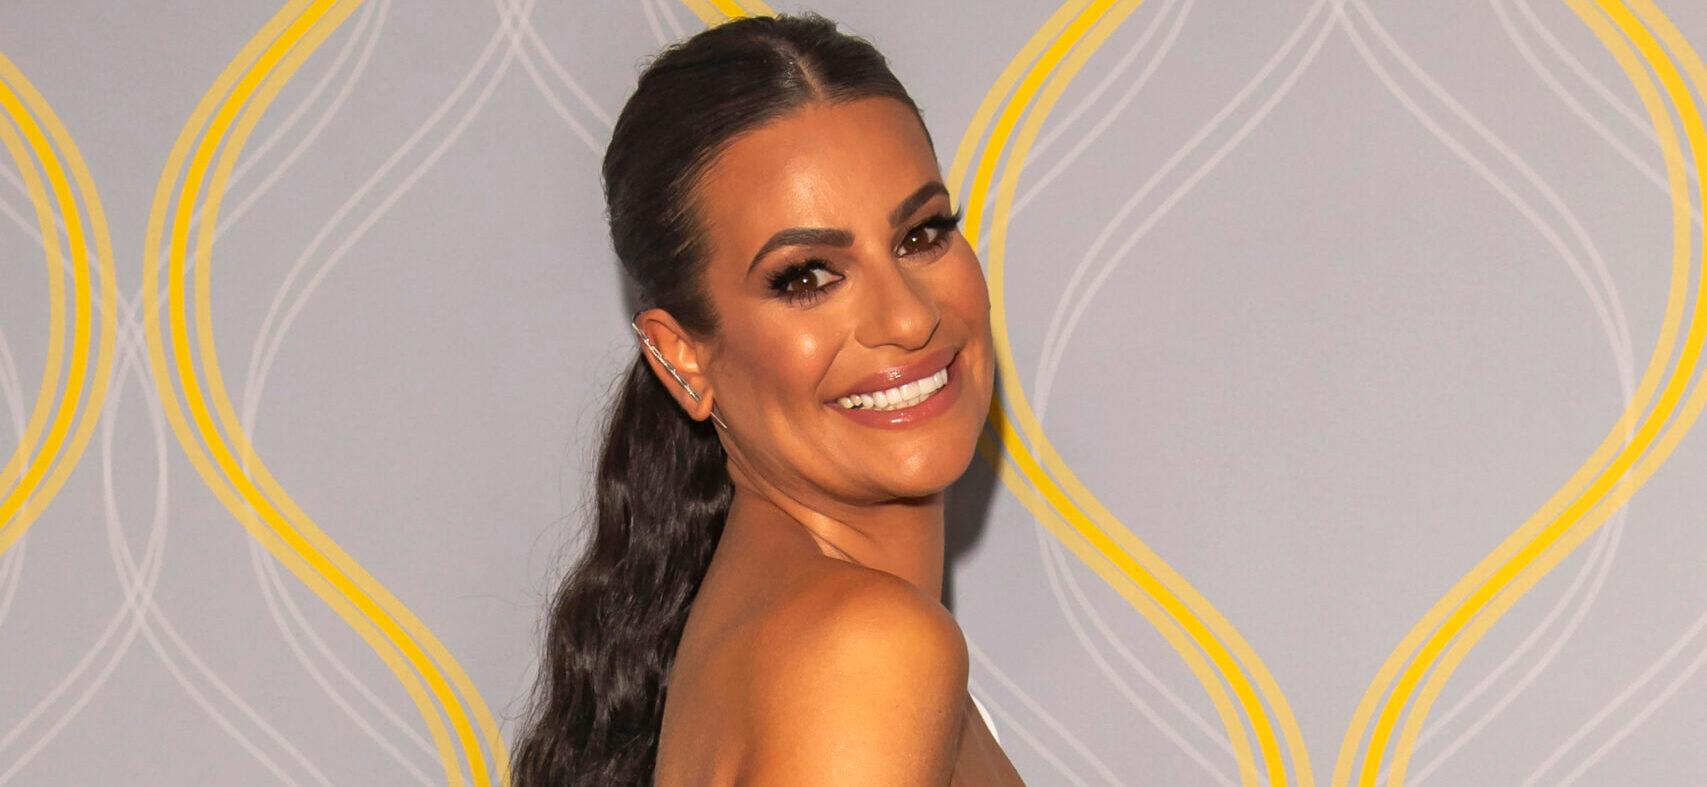 ‘Glee’ Actress Reveals She Was A Nervous Wreck Around Lea Michele: ‘Don’t Even Look In Her Direction’